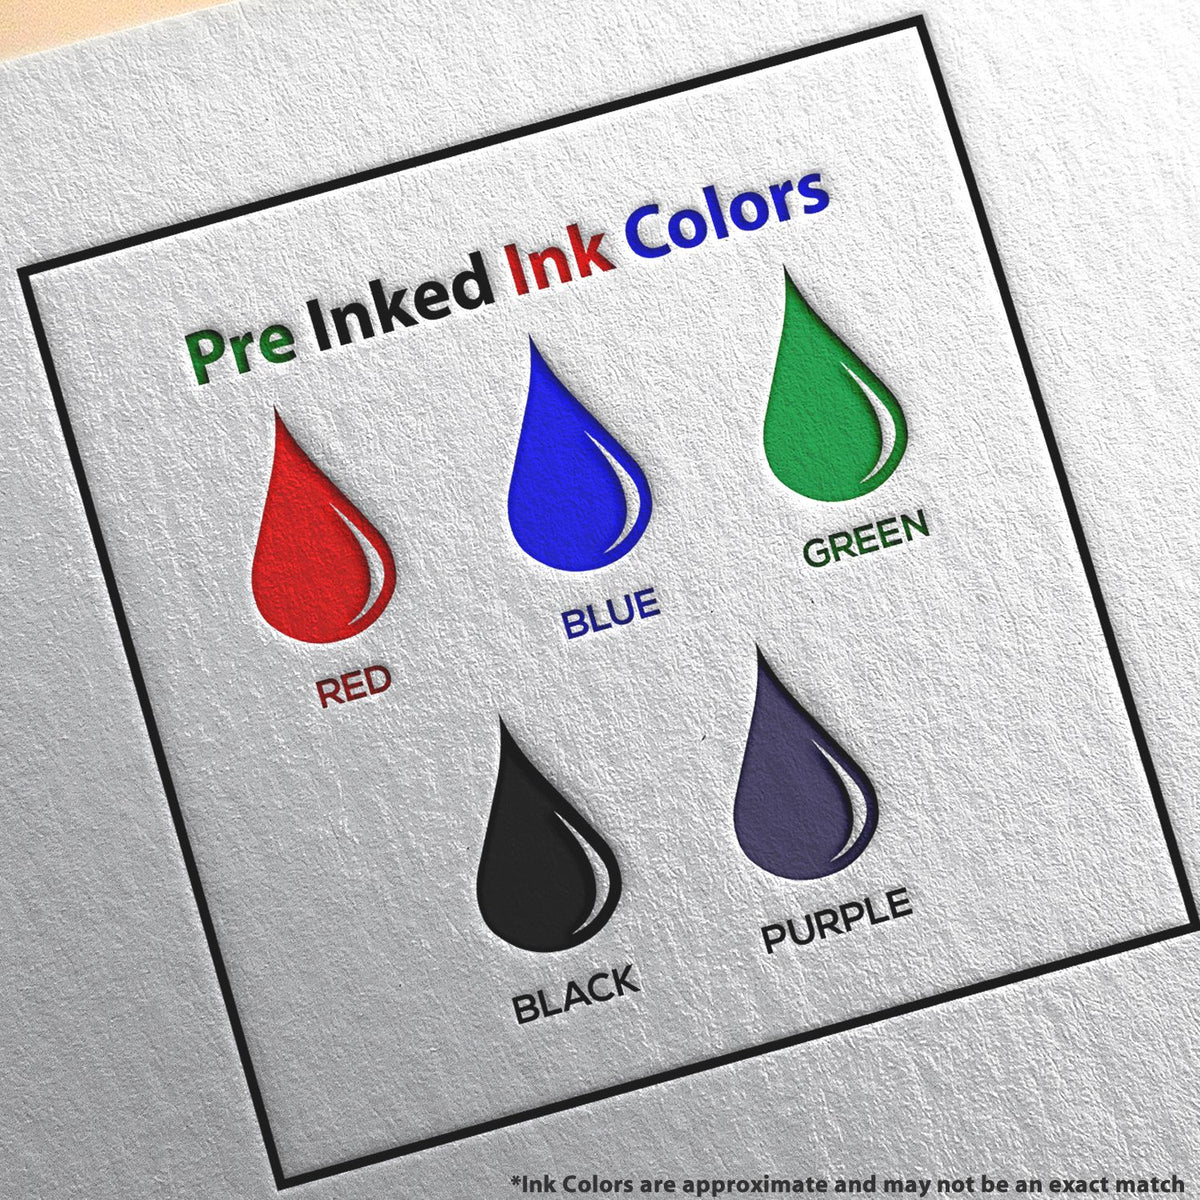 A picture showing the different ink colors or hues available for the Slim Pre-Inked Guam Architect Seal Stamp product.